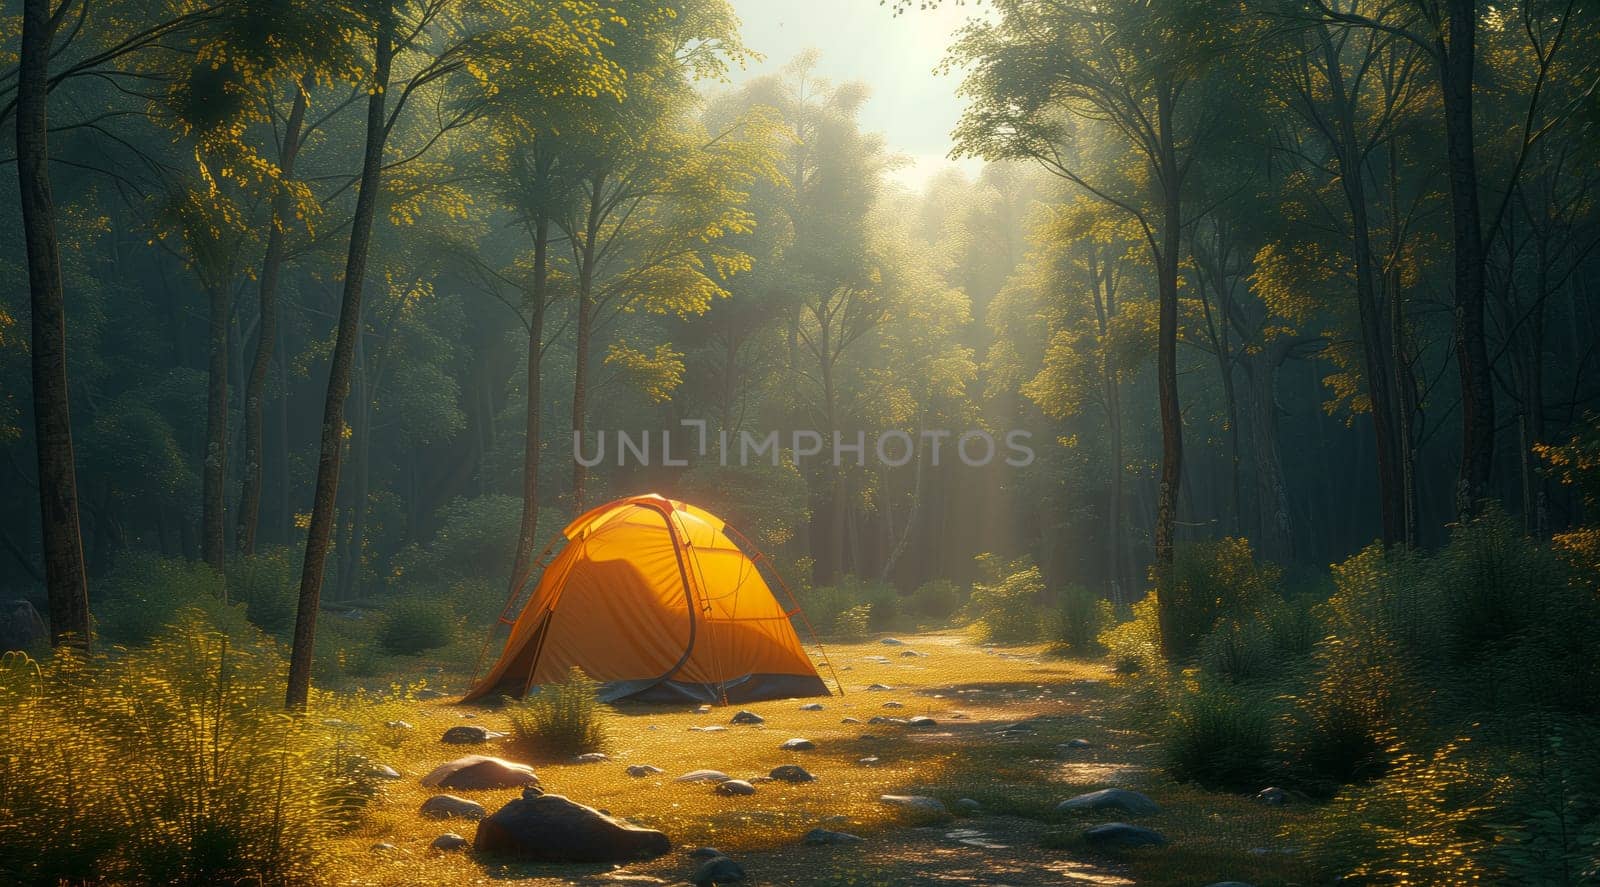 A tent is pitched in the heart of a lush forest surrounded by towering trees, vibrant green grass, and the peaceful sounds of nature